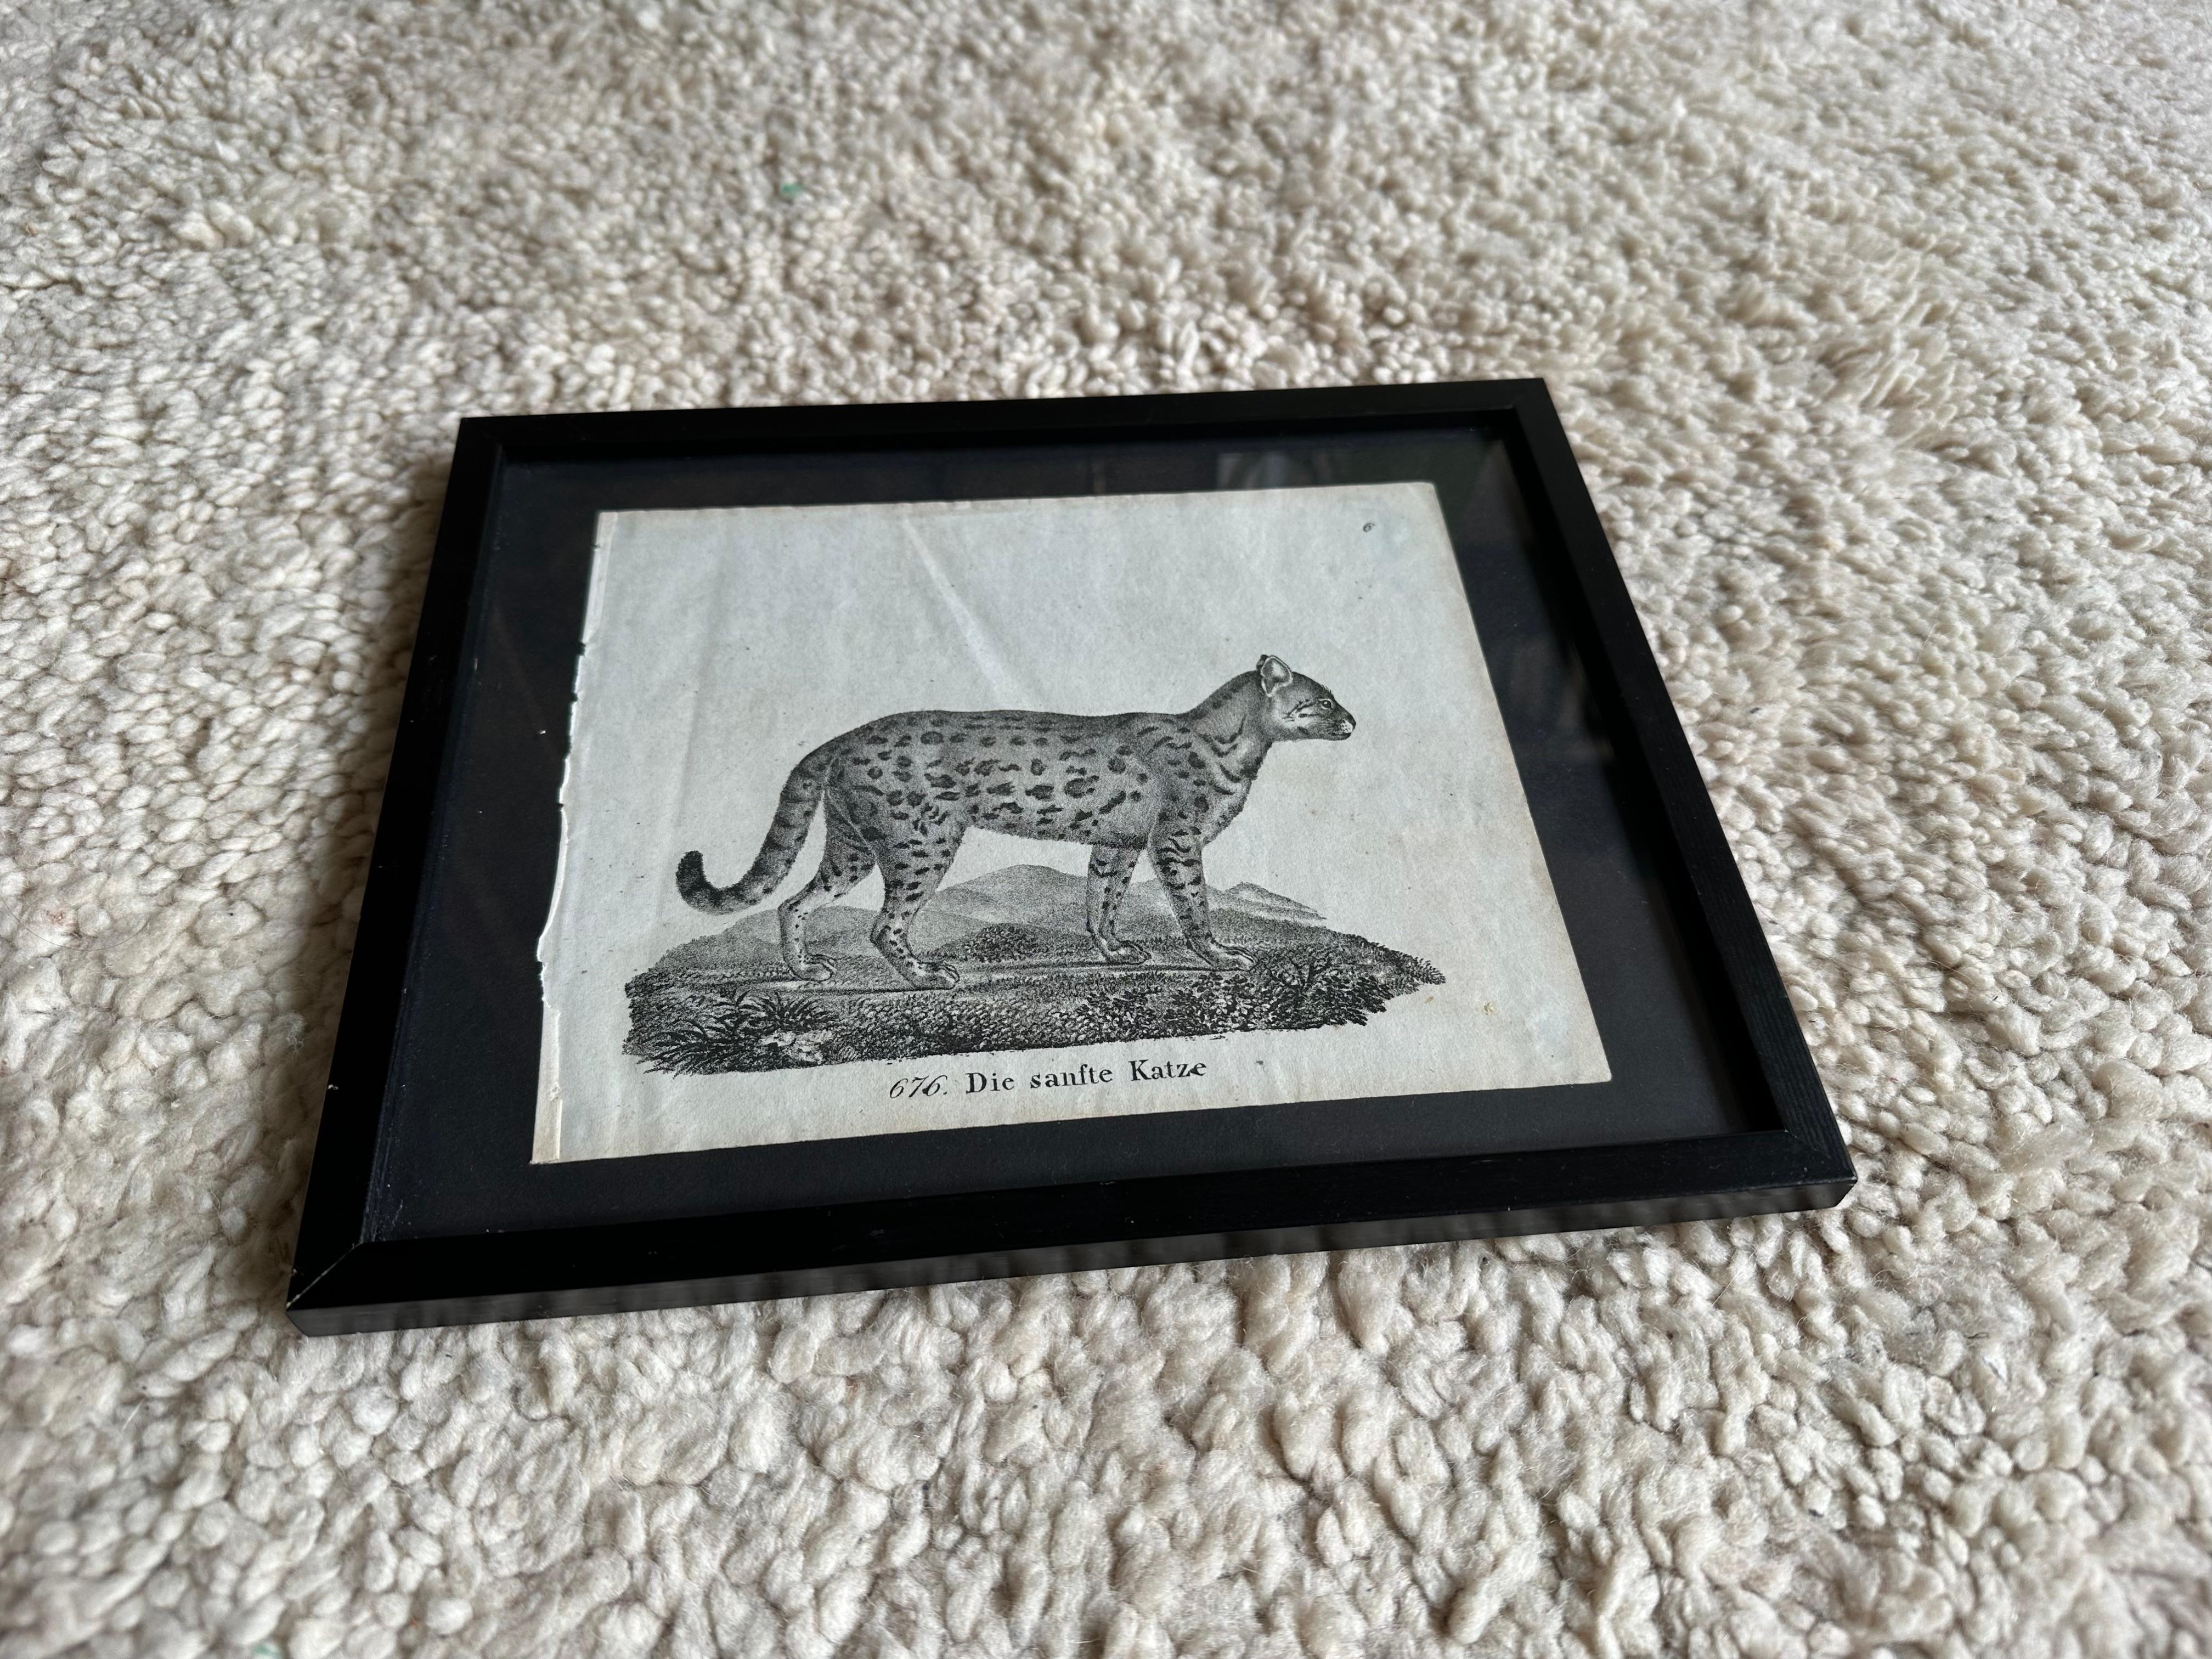 Zoological Original Lithograph Featuring 